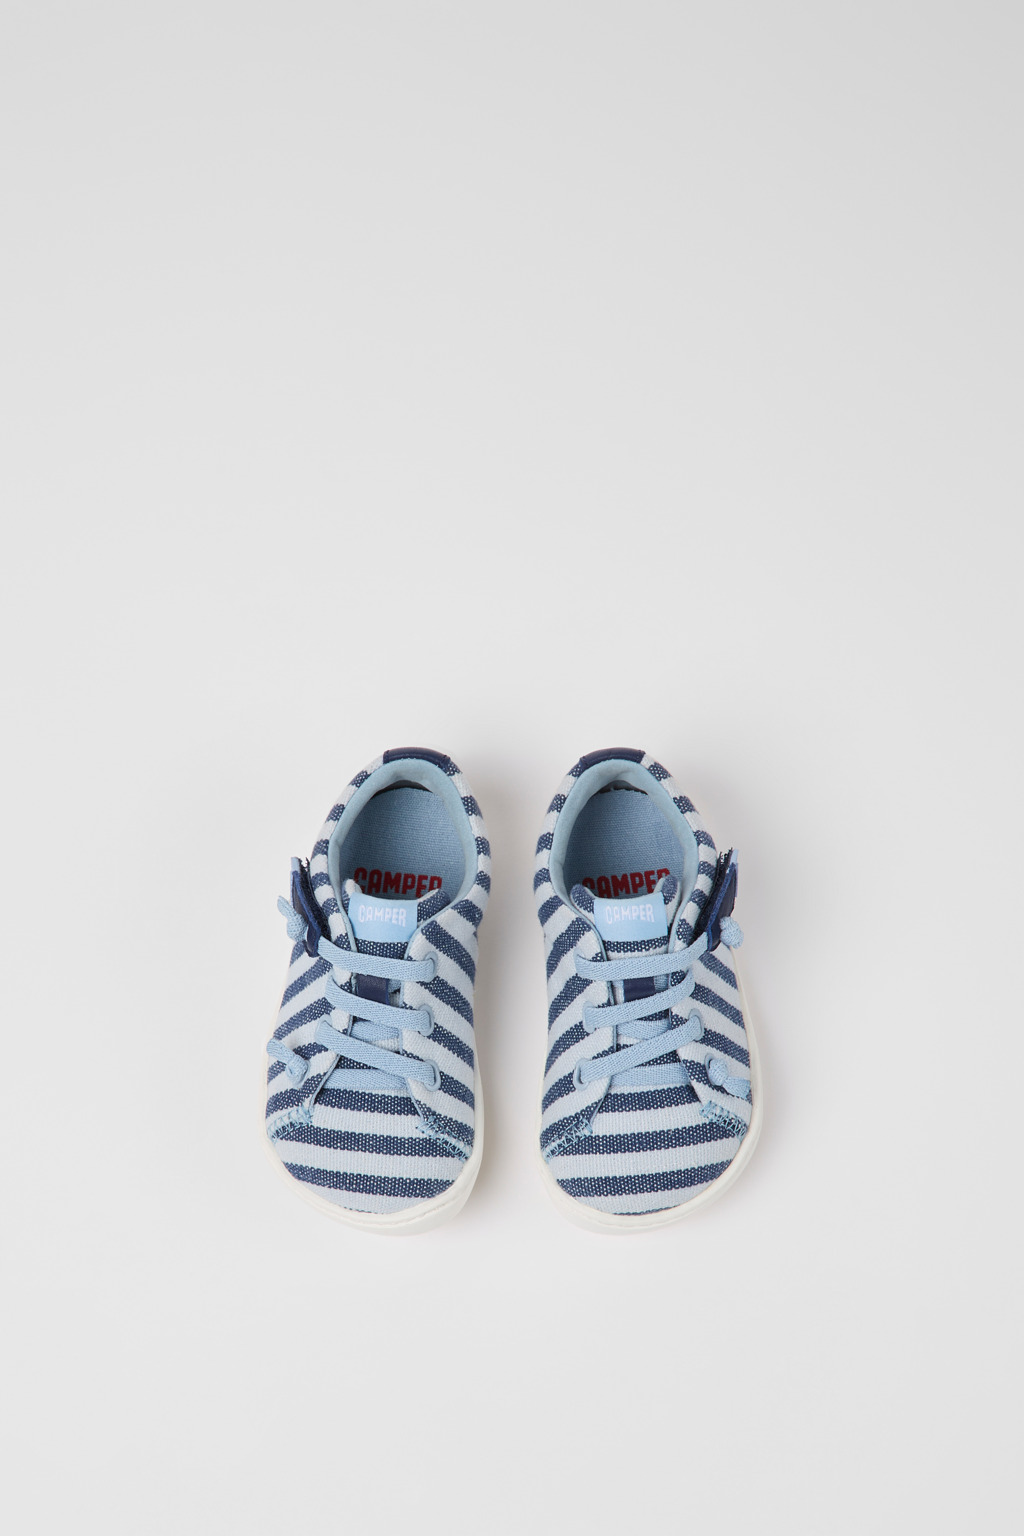 Peu Blue SMART CASUAL SHOES for Kids - Spring/Summer collection 